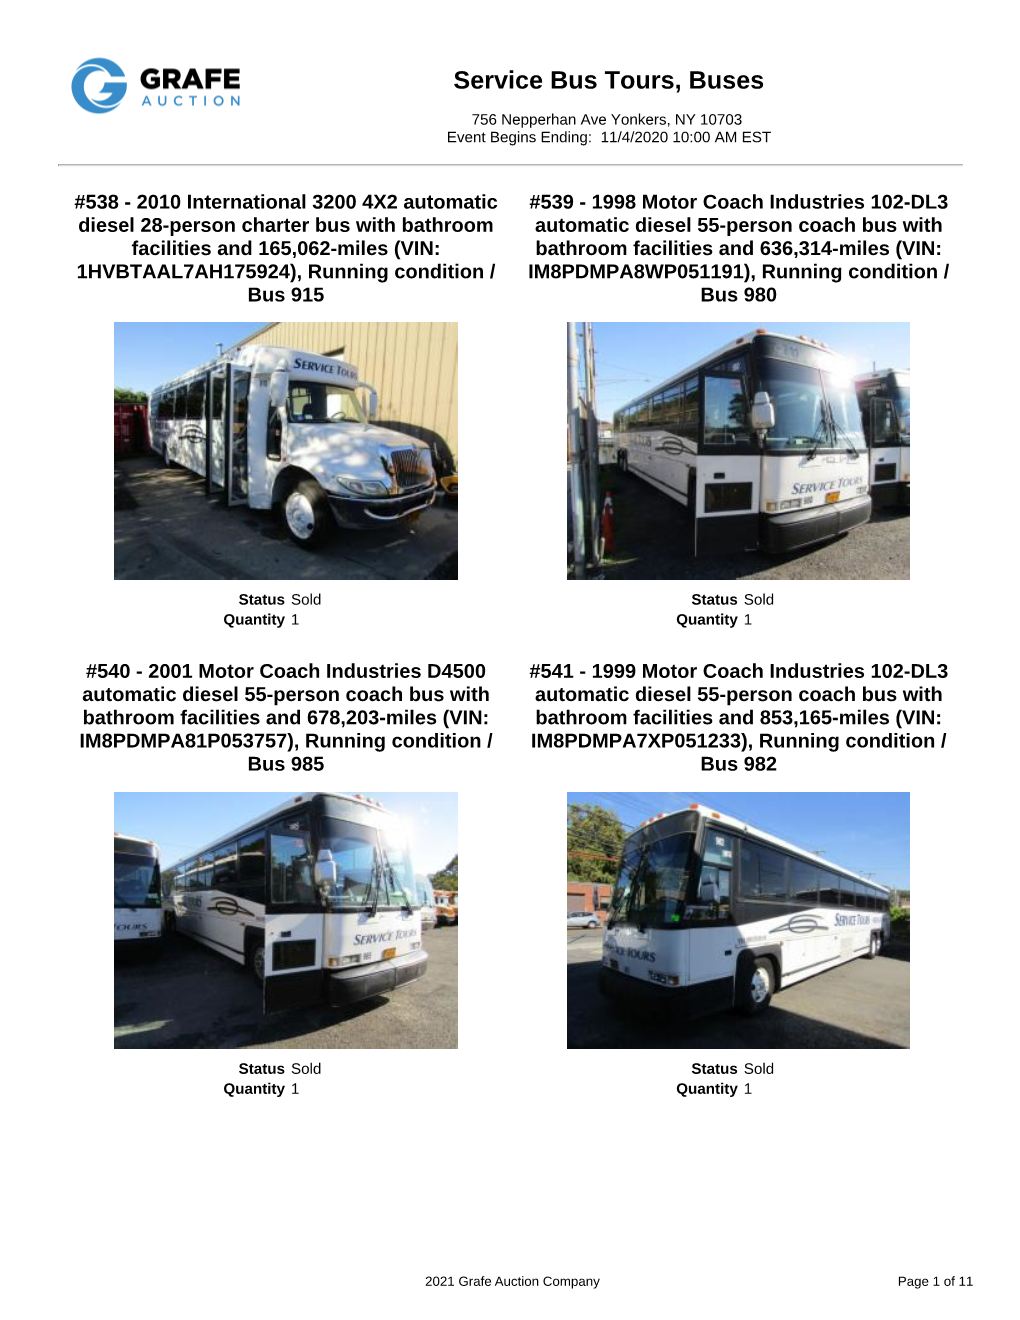 Catalog for Event "Service Bus Tours, Buses" (11/04